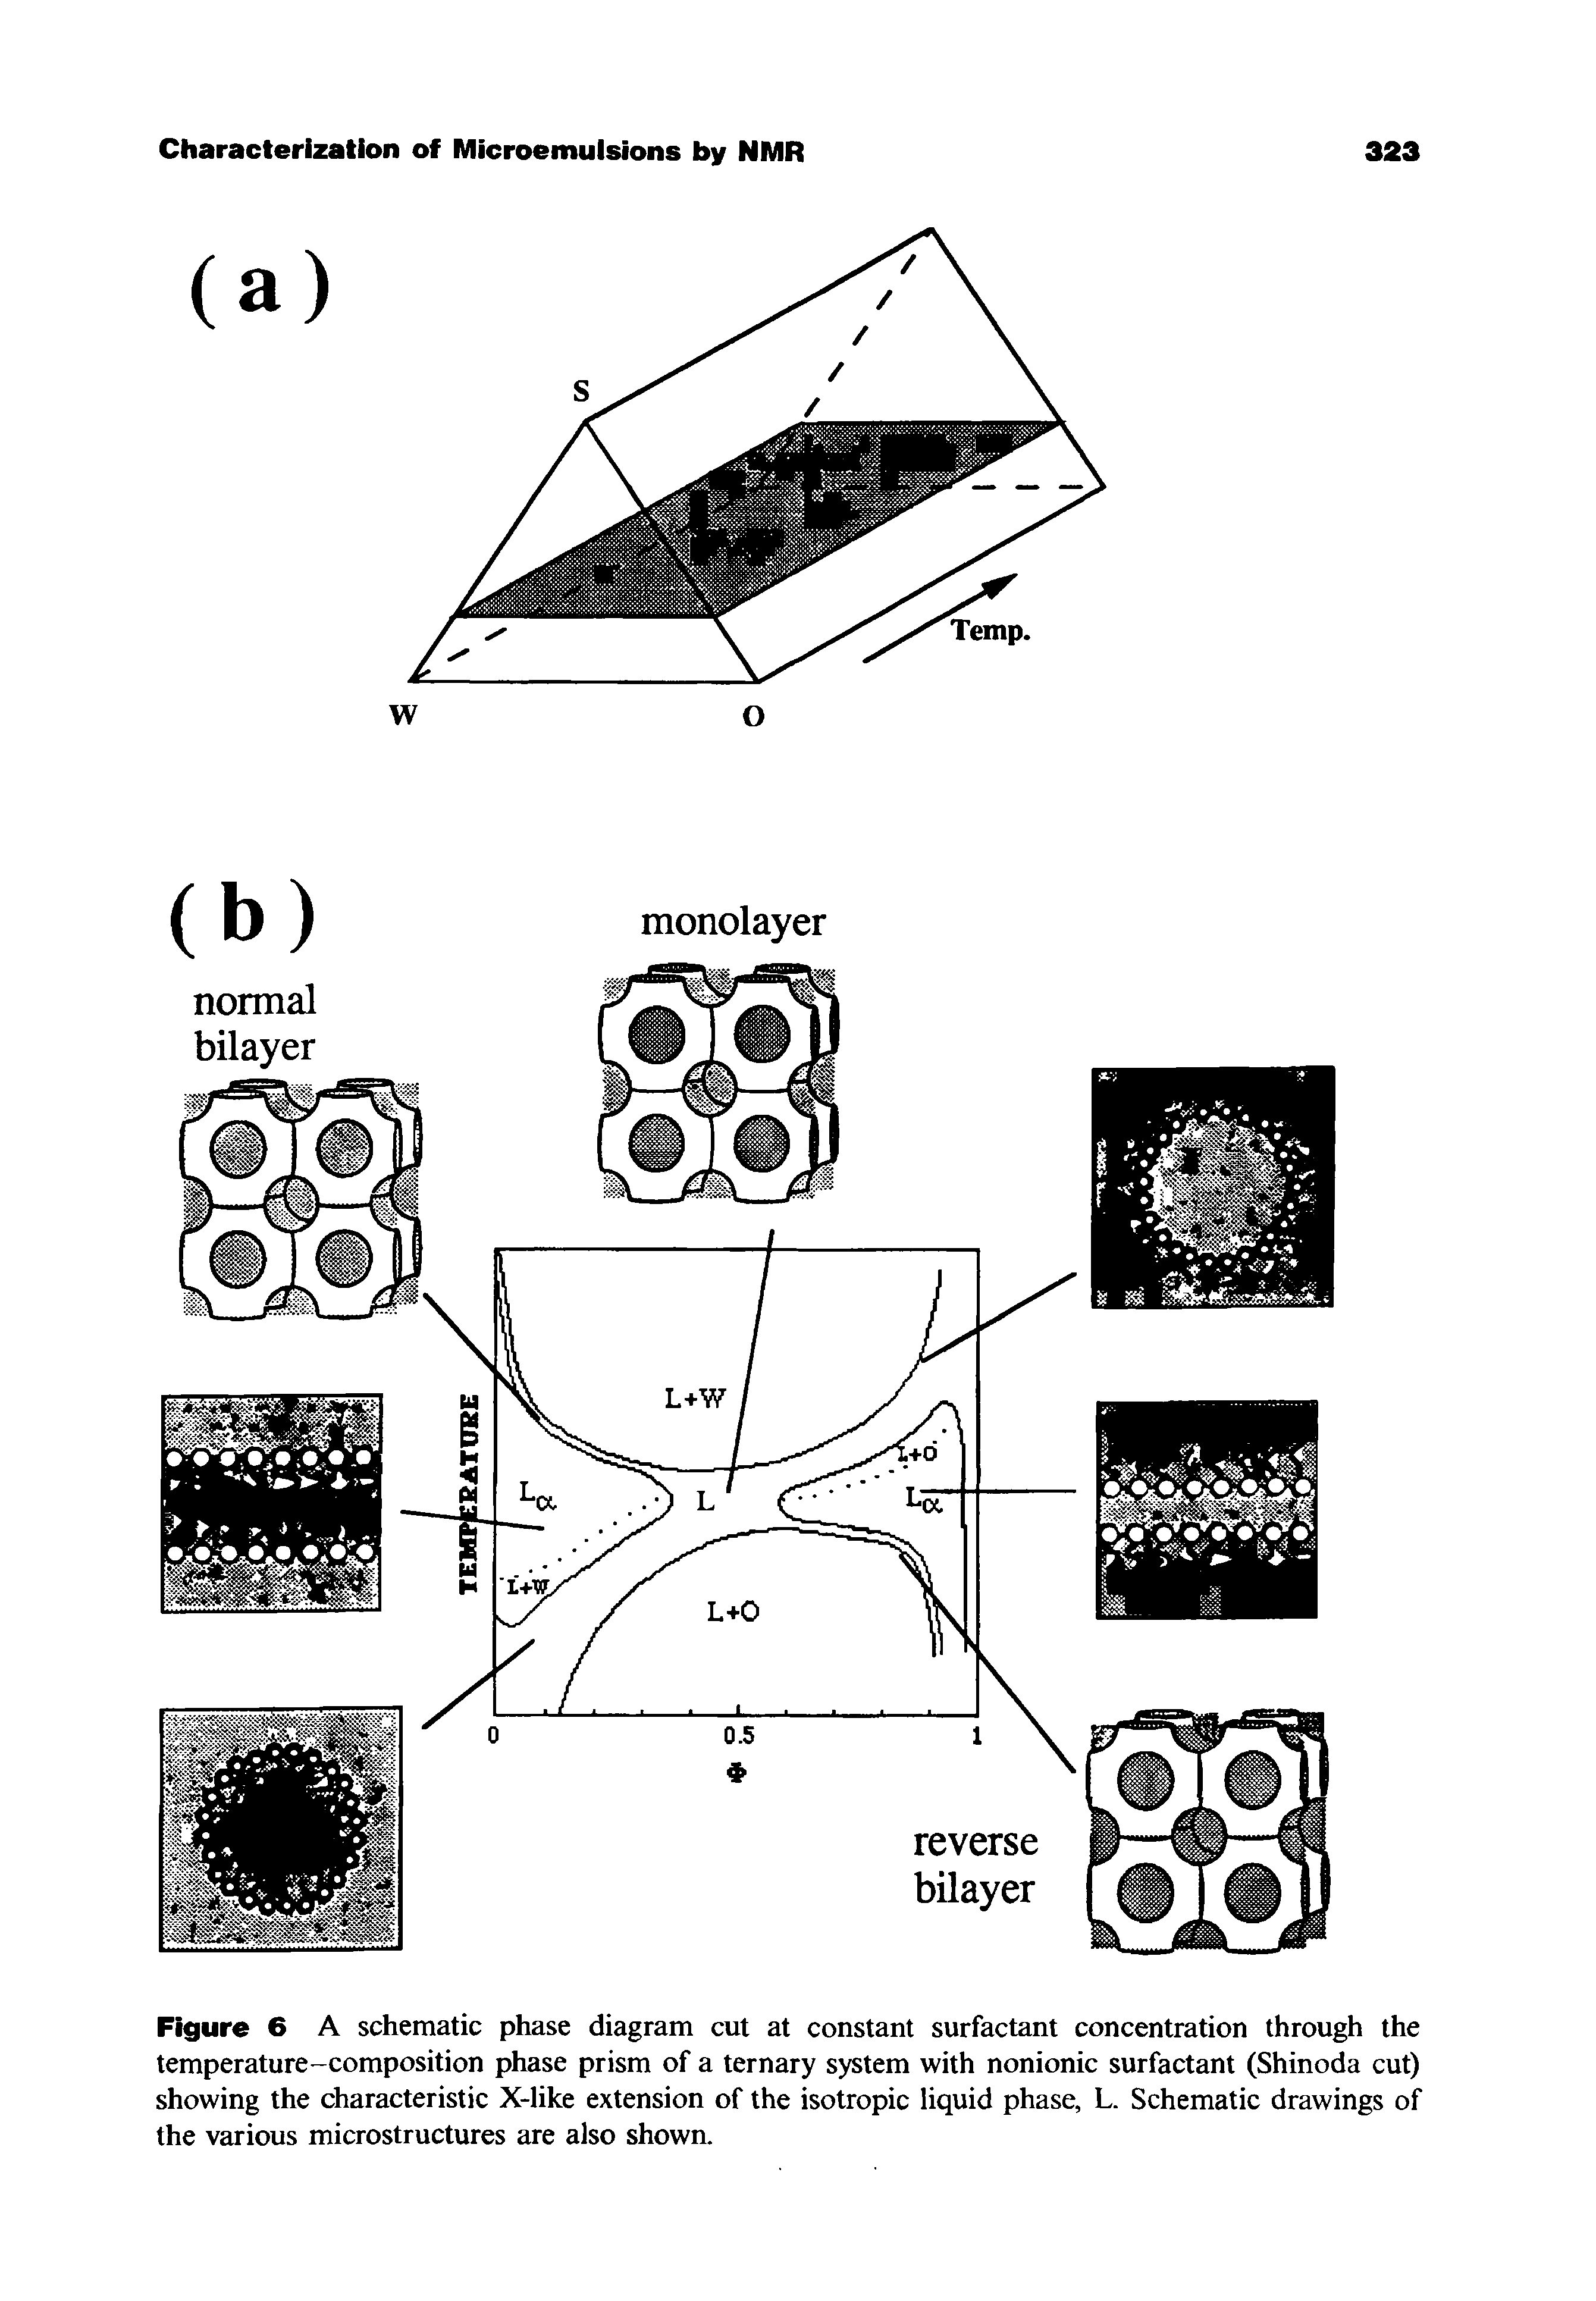 Figure 6 A schematic phase diagram cut at constant surfactant concentration through the temperature-composition phase prism of a ternary system with nonionic surfactant (Shinoda cut) showing the characteristic X-like extension of the isotropic liquid phase, L. Schematic drawings of the various microstructures are also shown.